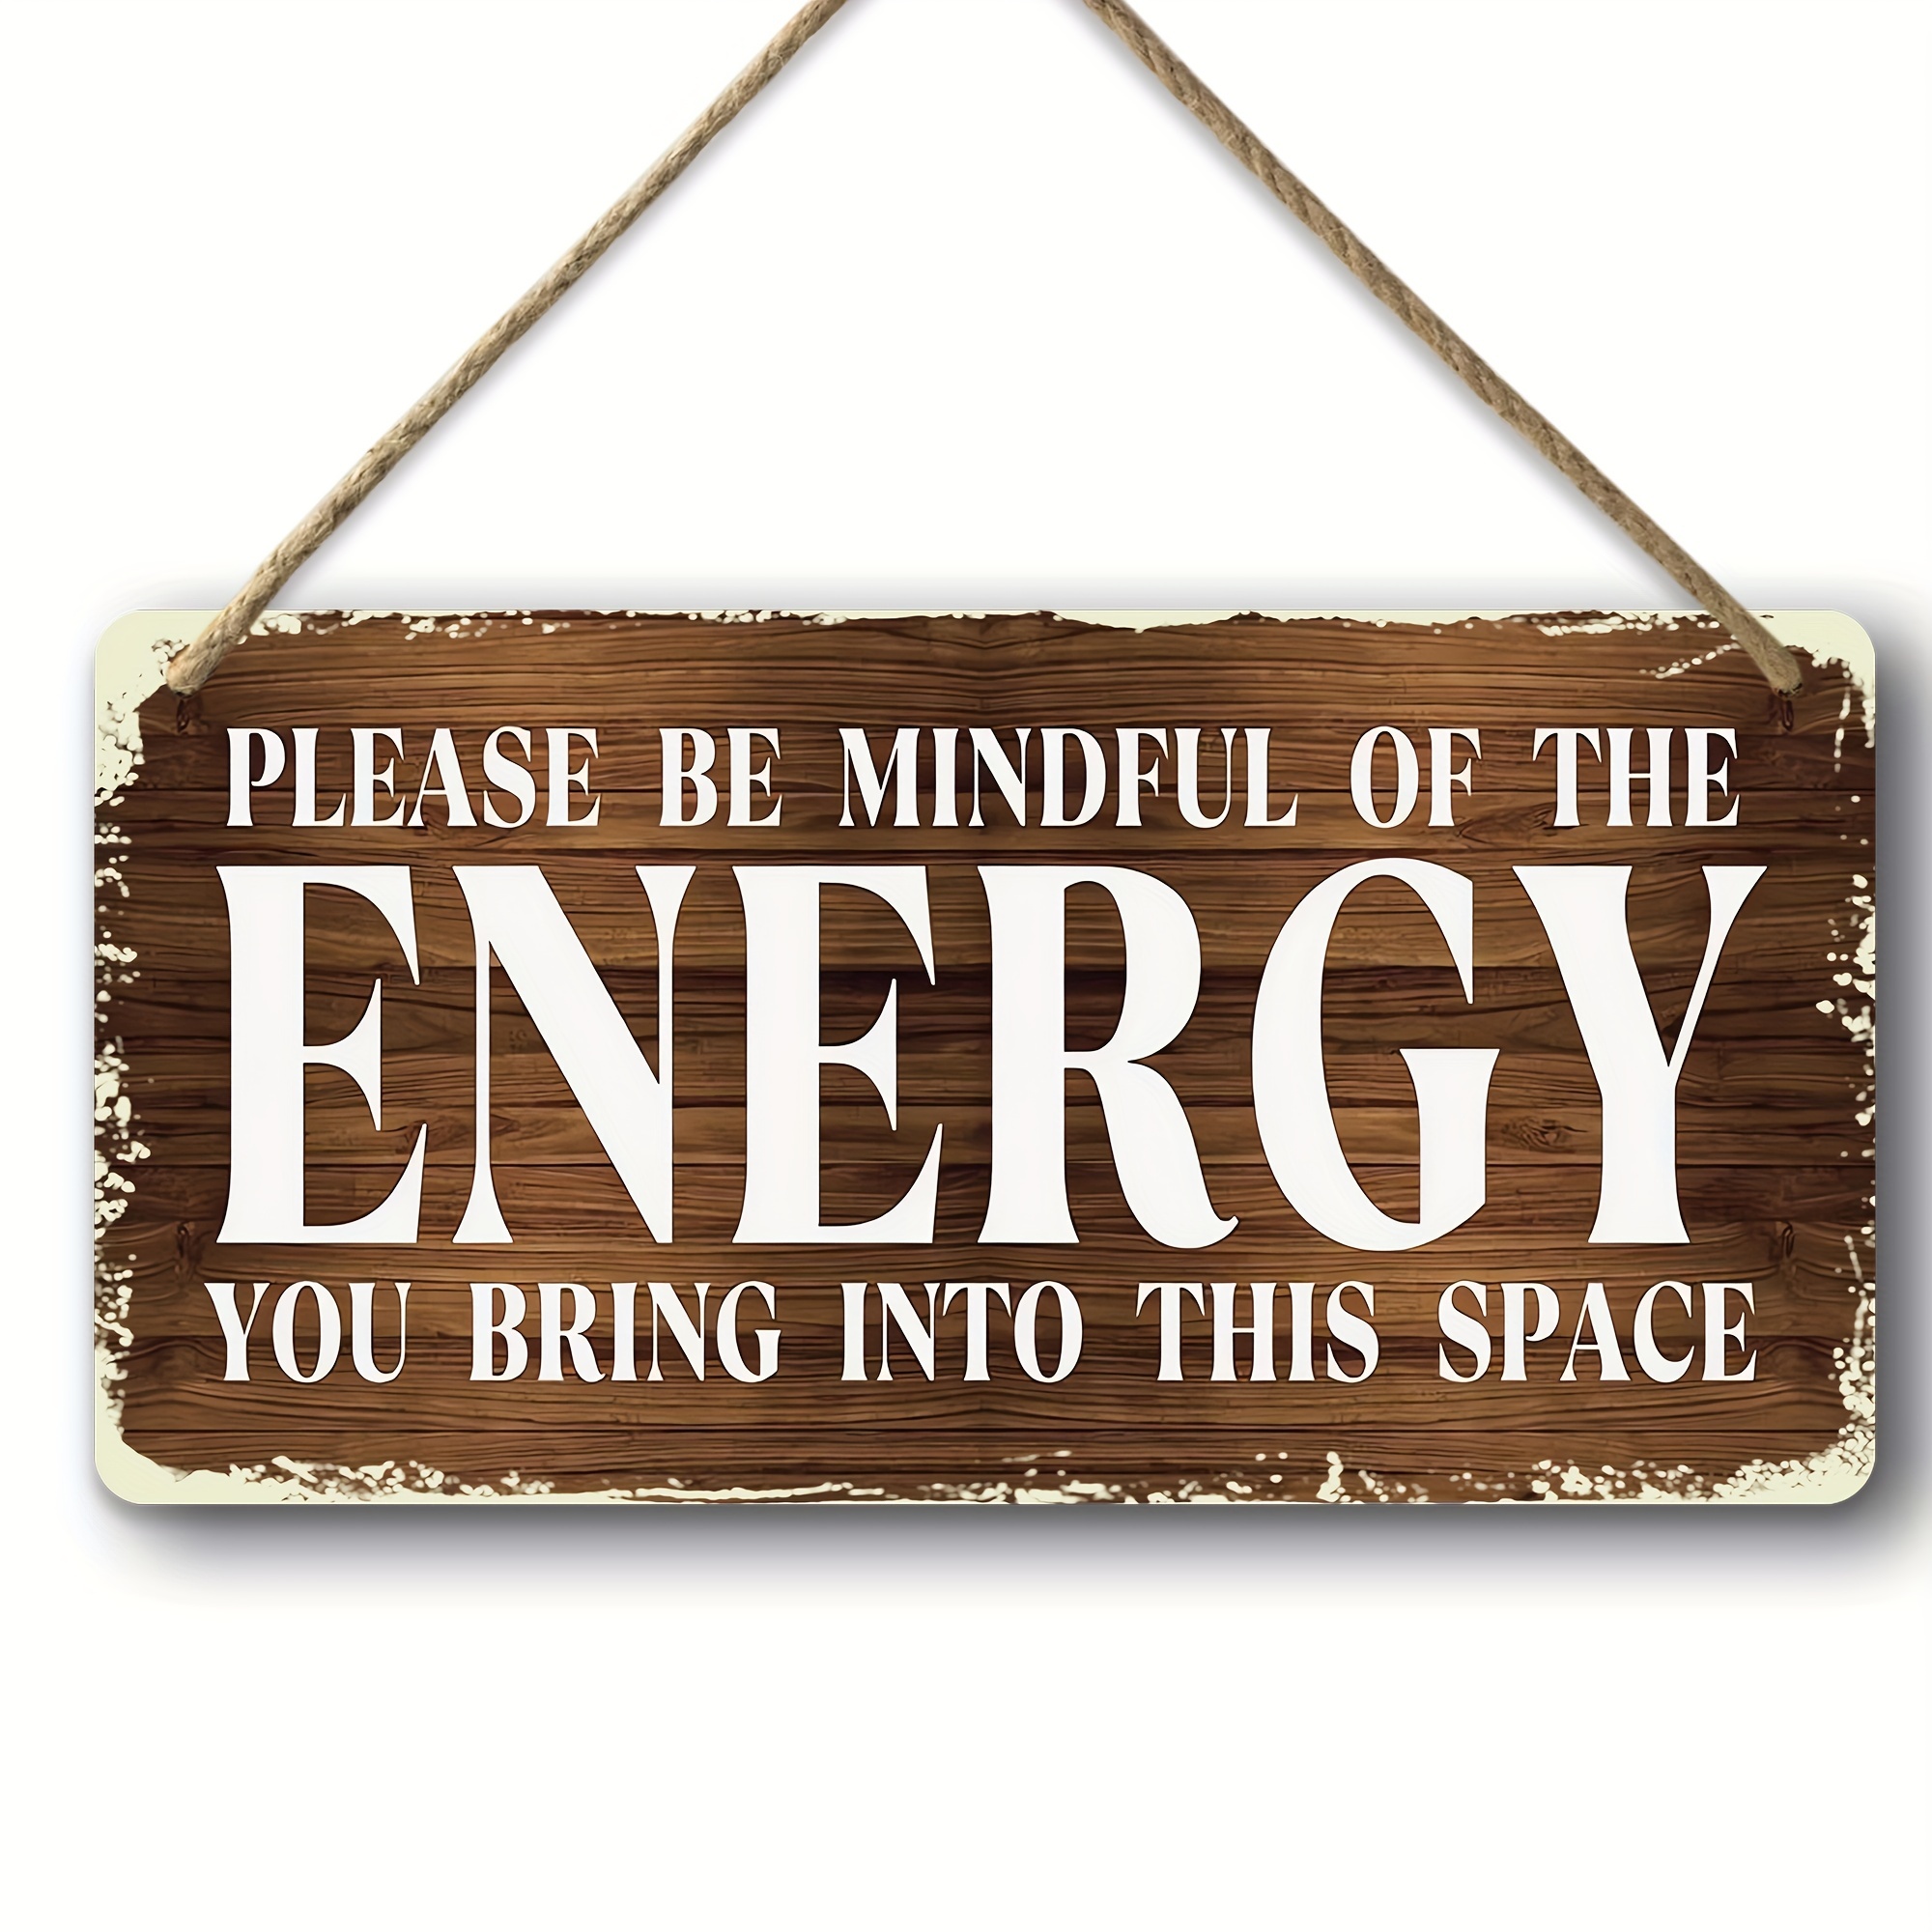 

Rustic Positive Quote Wooden Decorative Sign - Mindful Energy Wall Art Hanging Door Plaque For Home Office Decor - Other Wooden Material (5.9"x11.8")